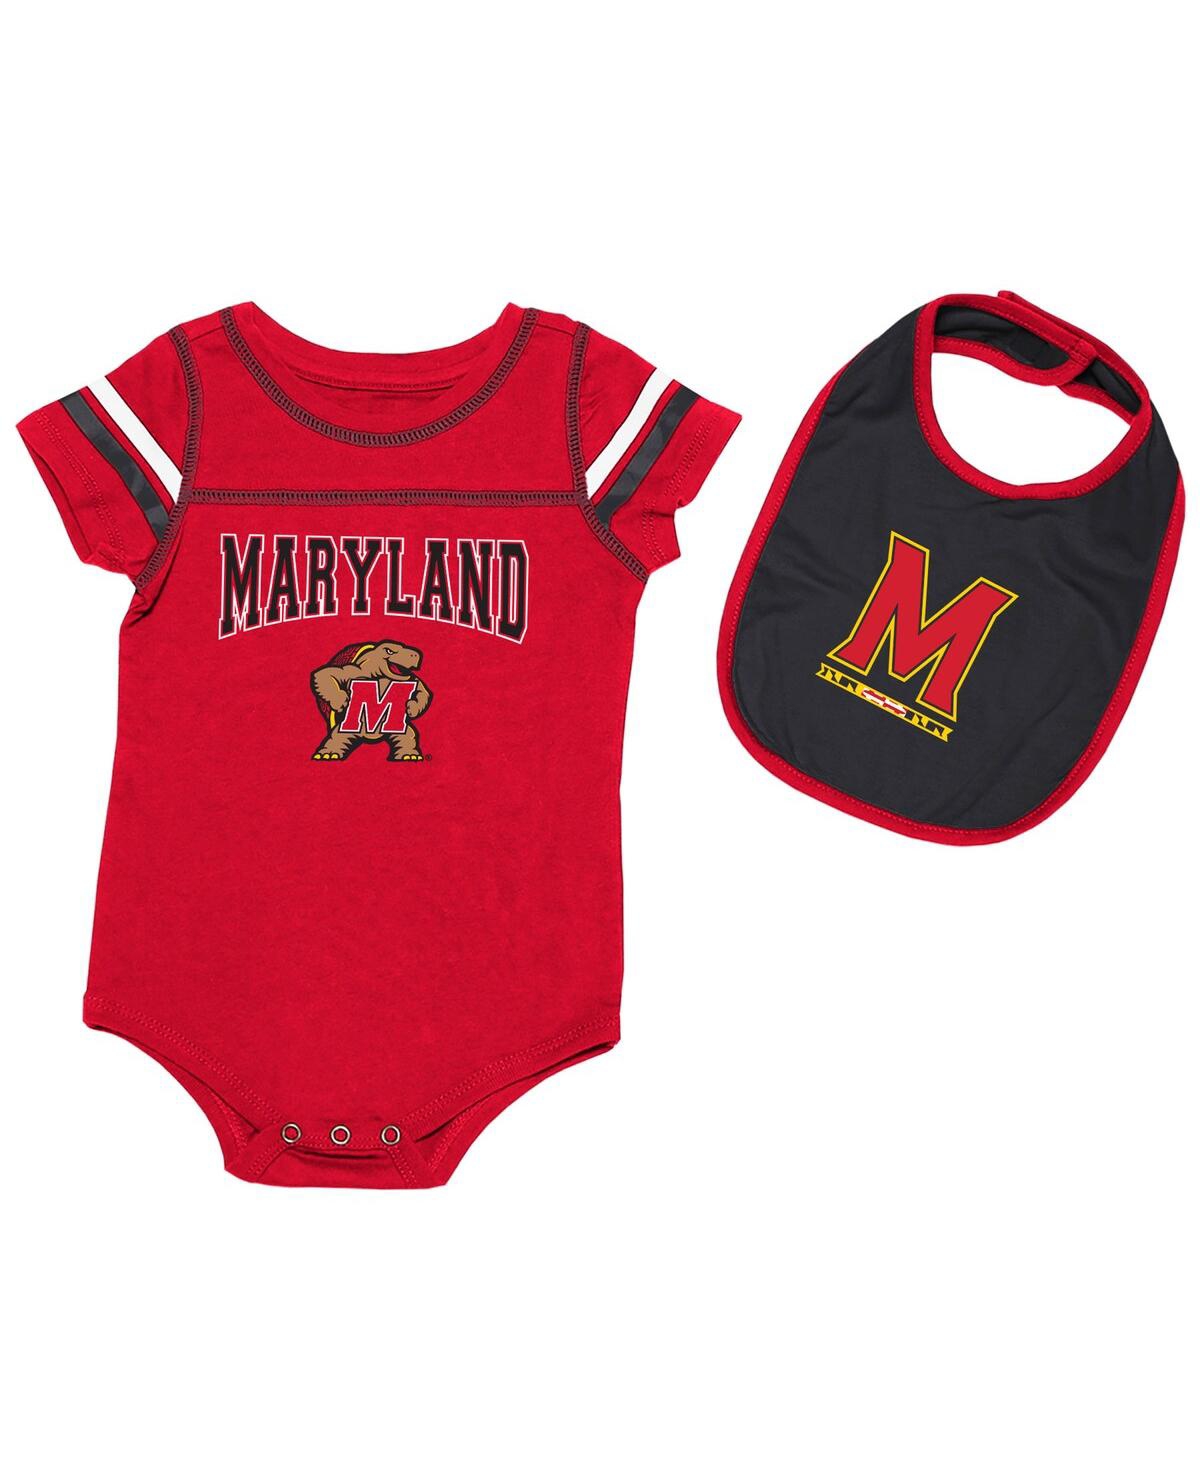 Colosseum Babies' Newborn And Infant Boys And Girls  Red Maryland Terrapins Chocolate Bodysuit And Bib Set